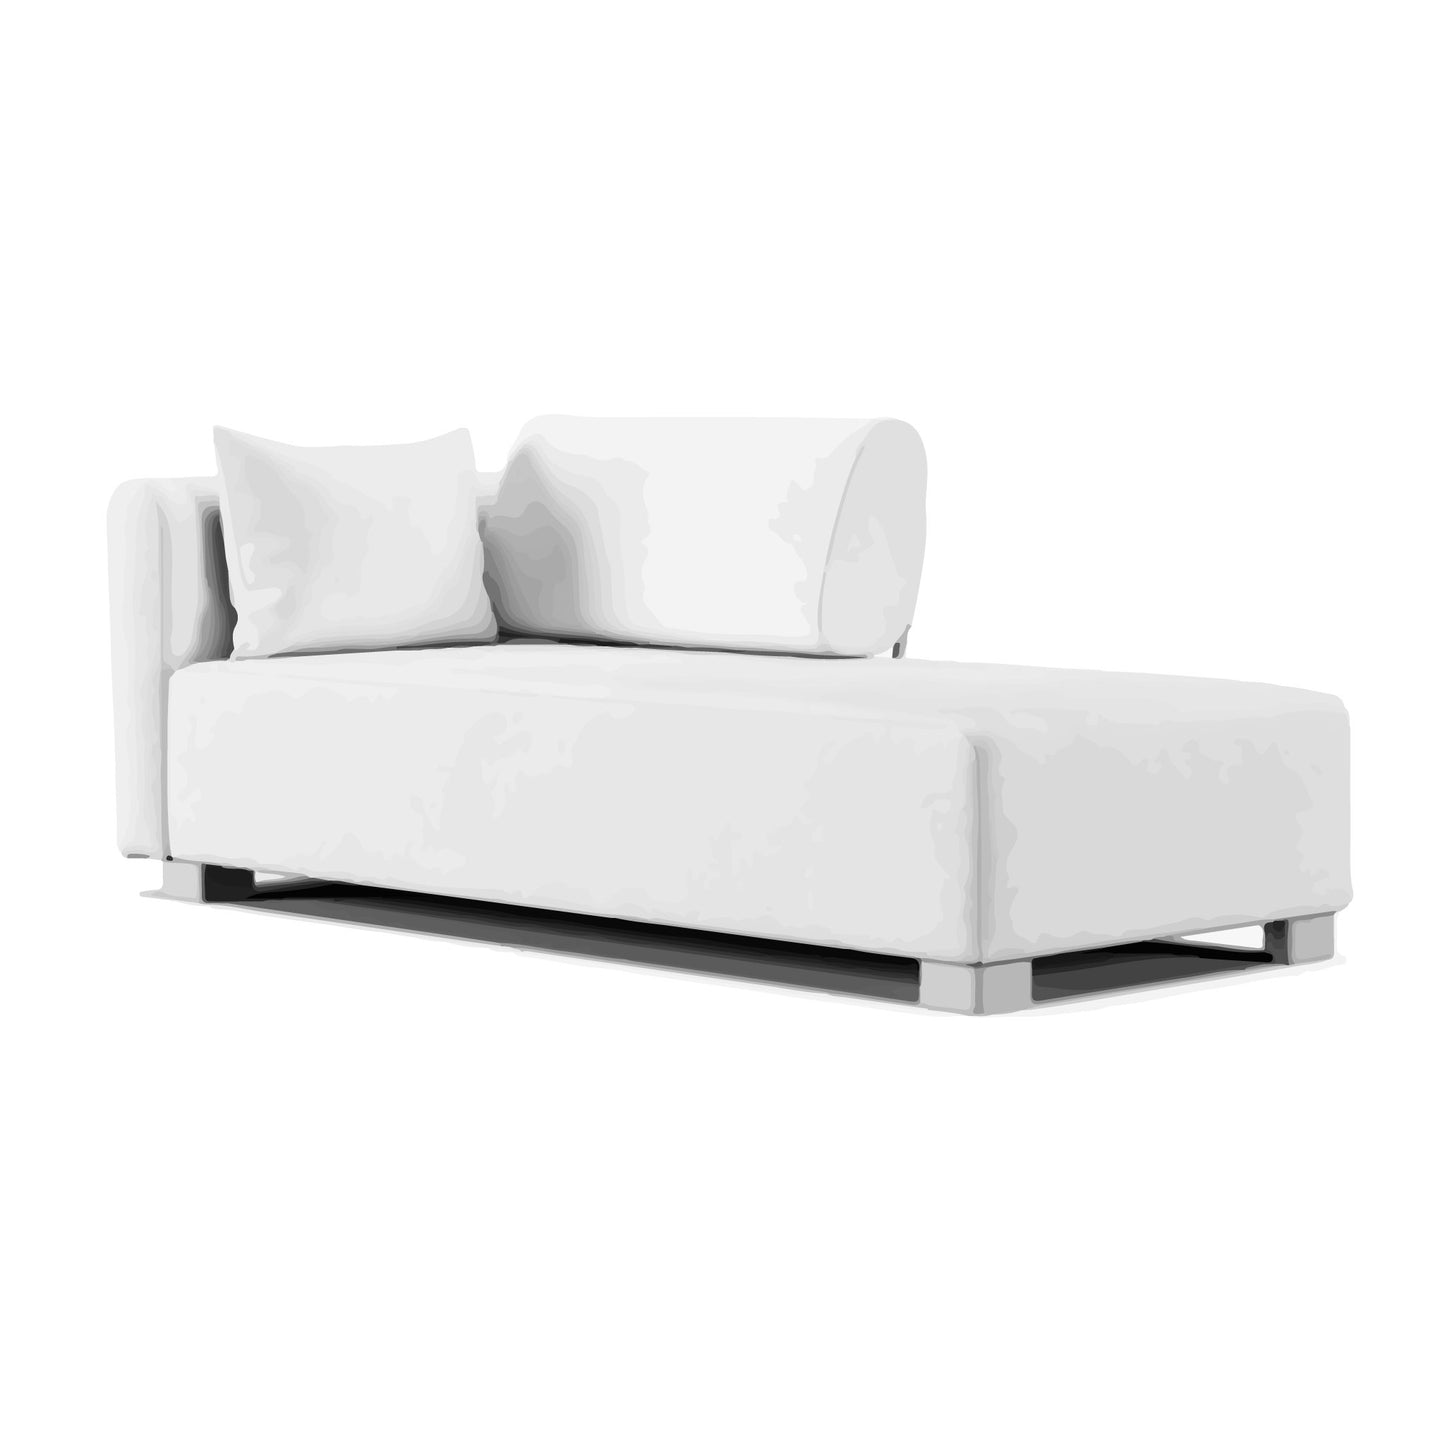 Mysinge Chaise Right or Left Cover